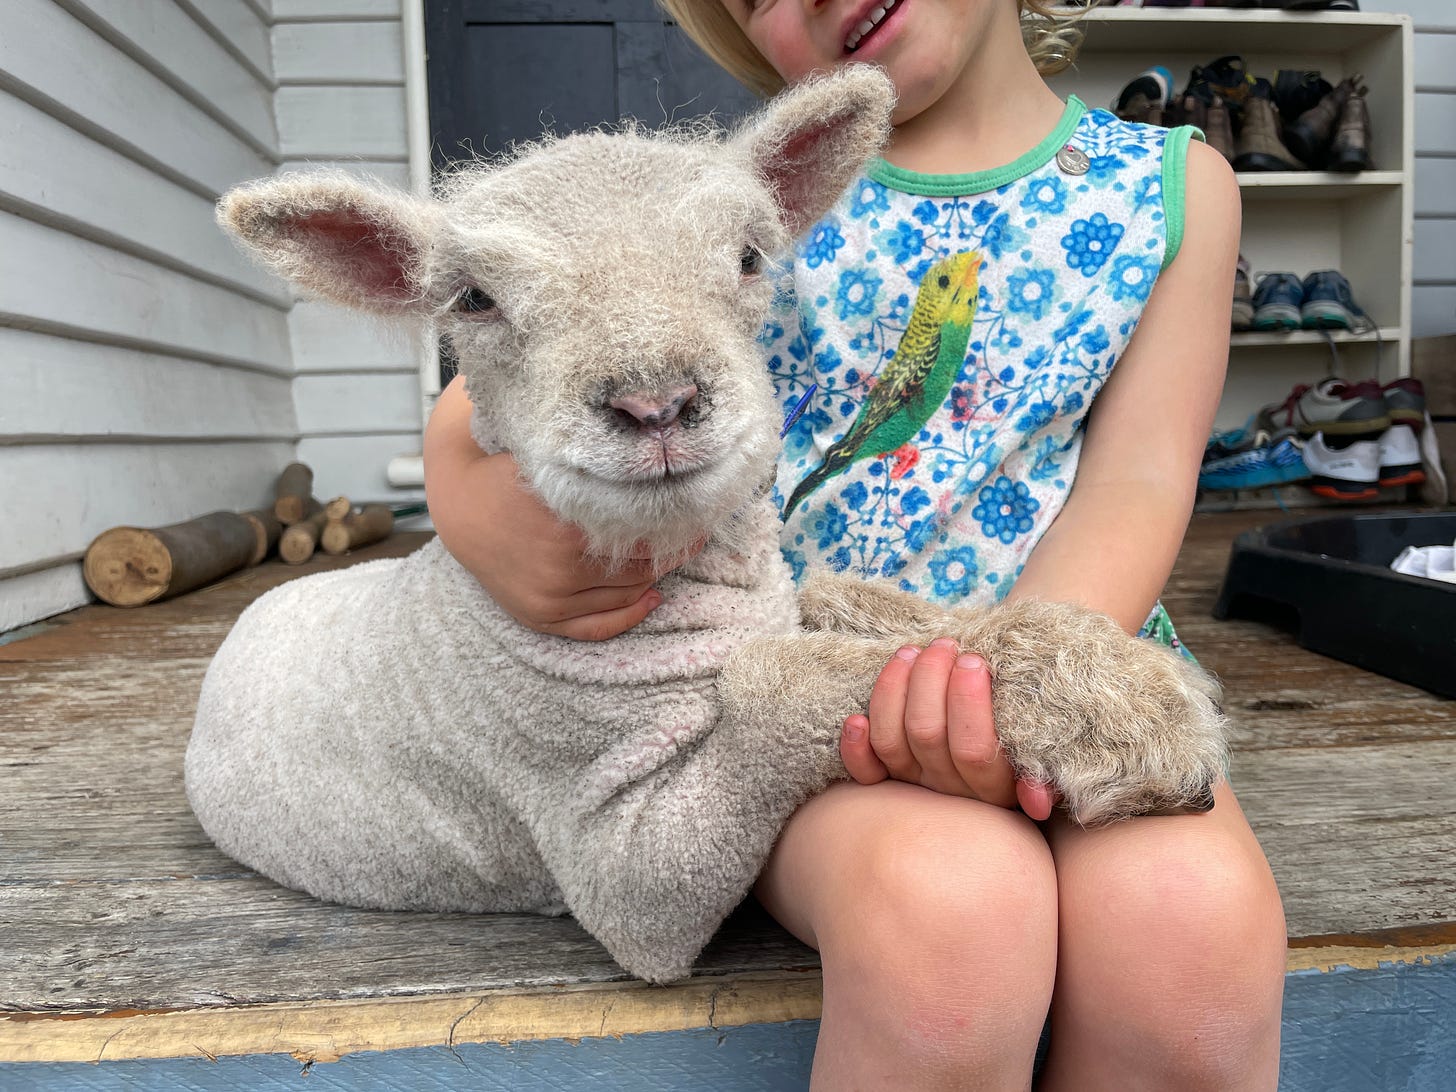 Girl cuddling four day old Lamb on our back deck